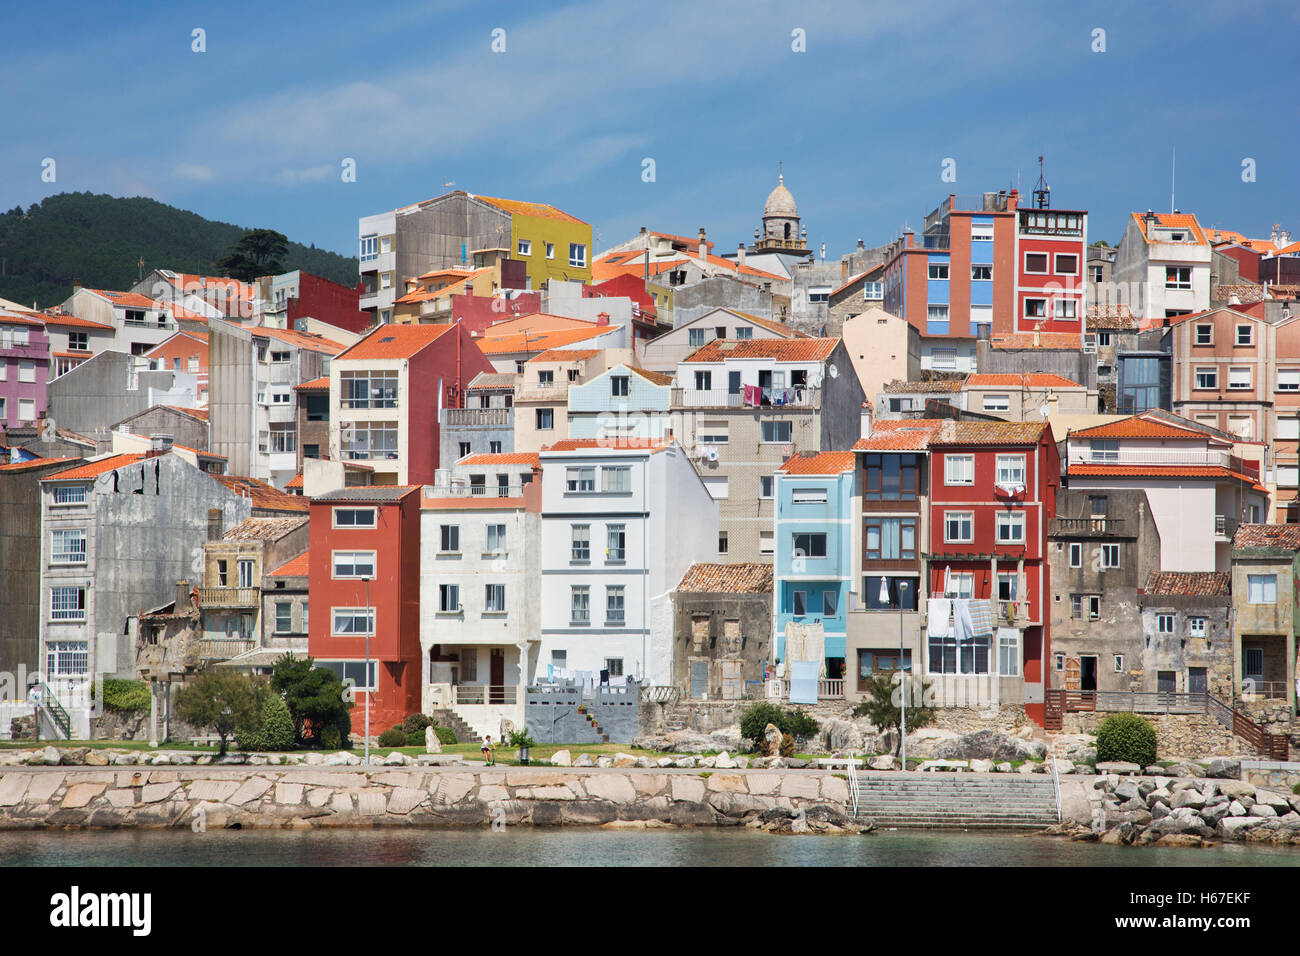 Builidings on the seashore at A Guarda in Galicia, Spain Stock Photo